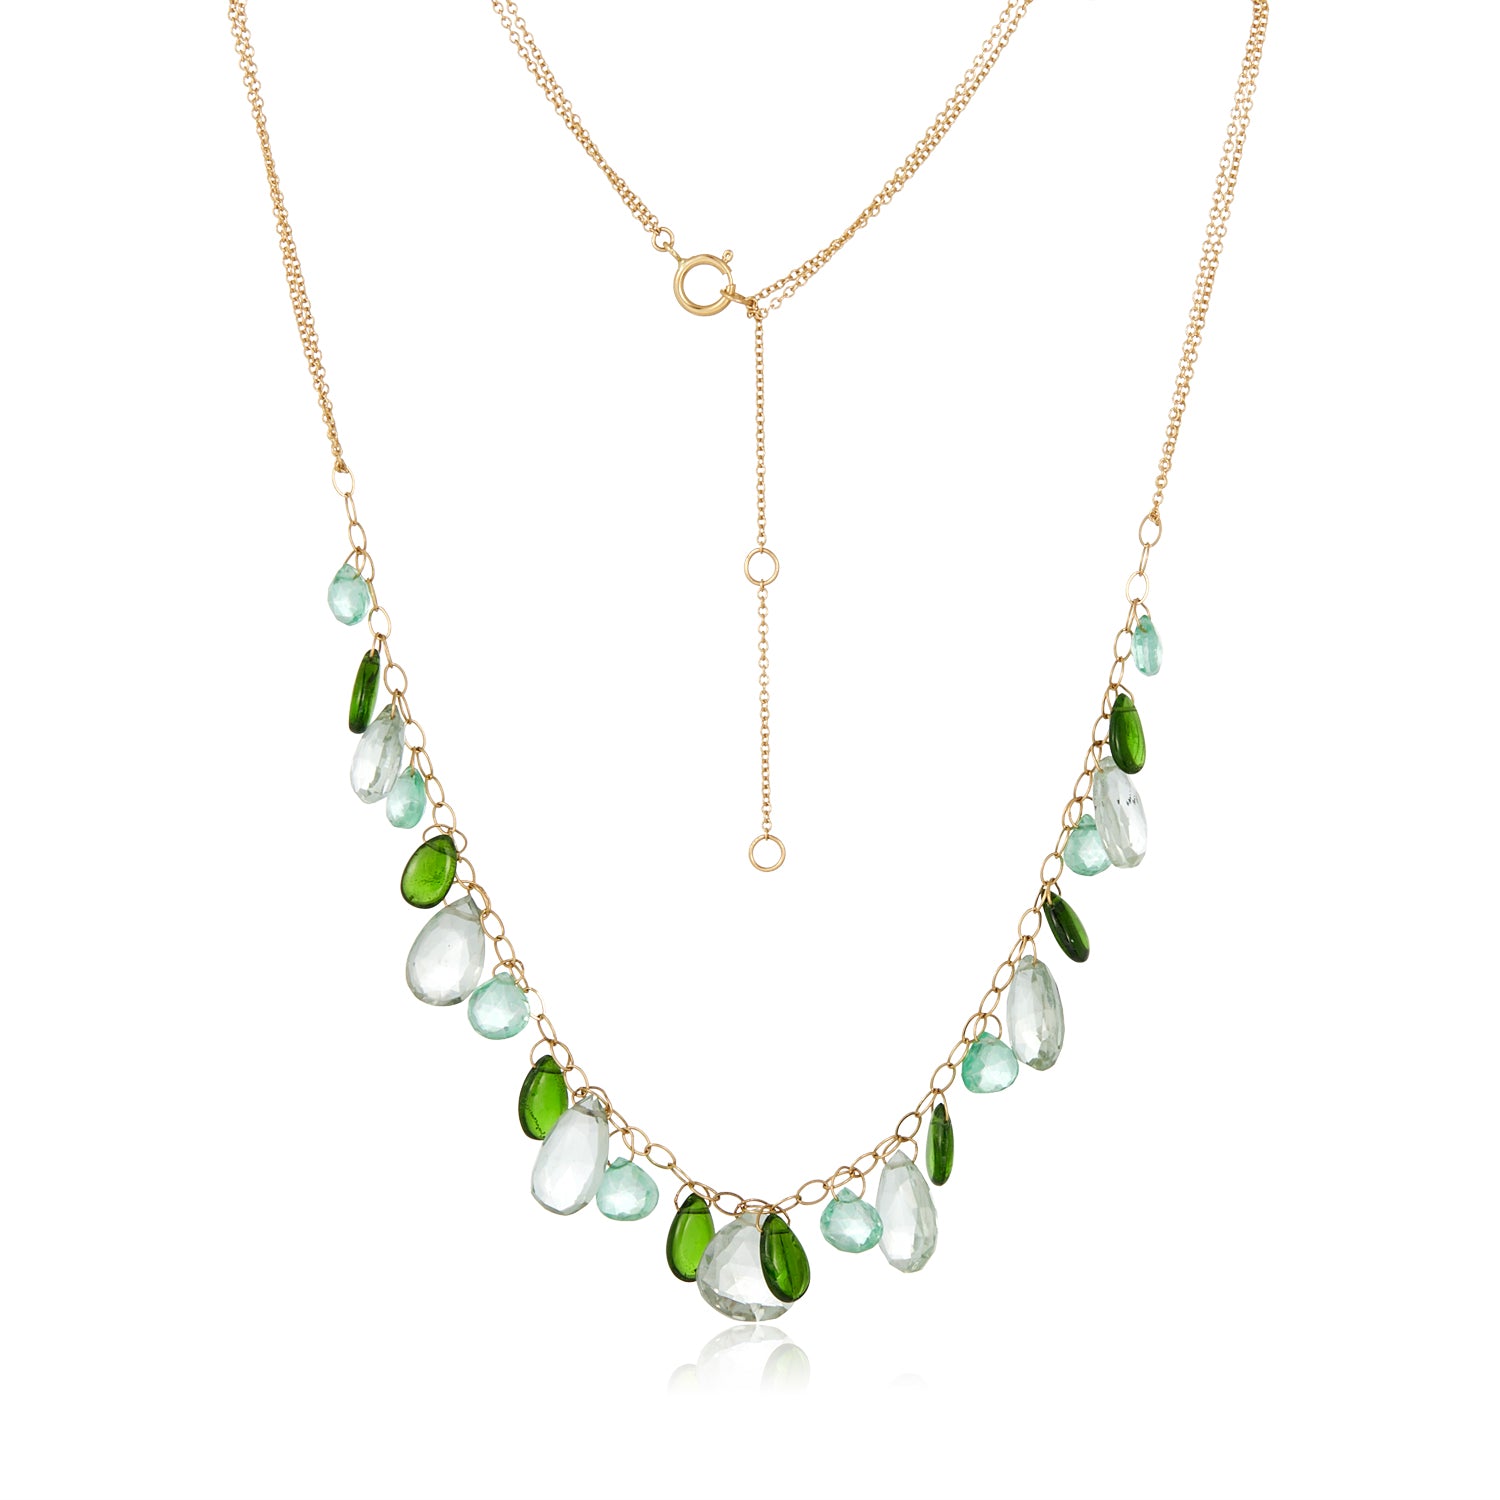 Love In Green Medley necklace 14k